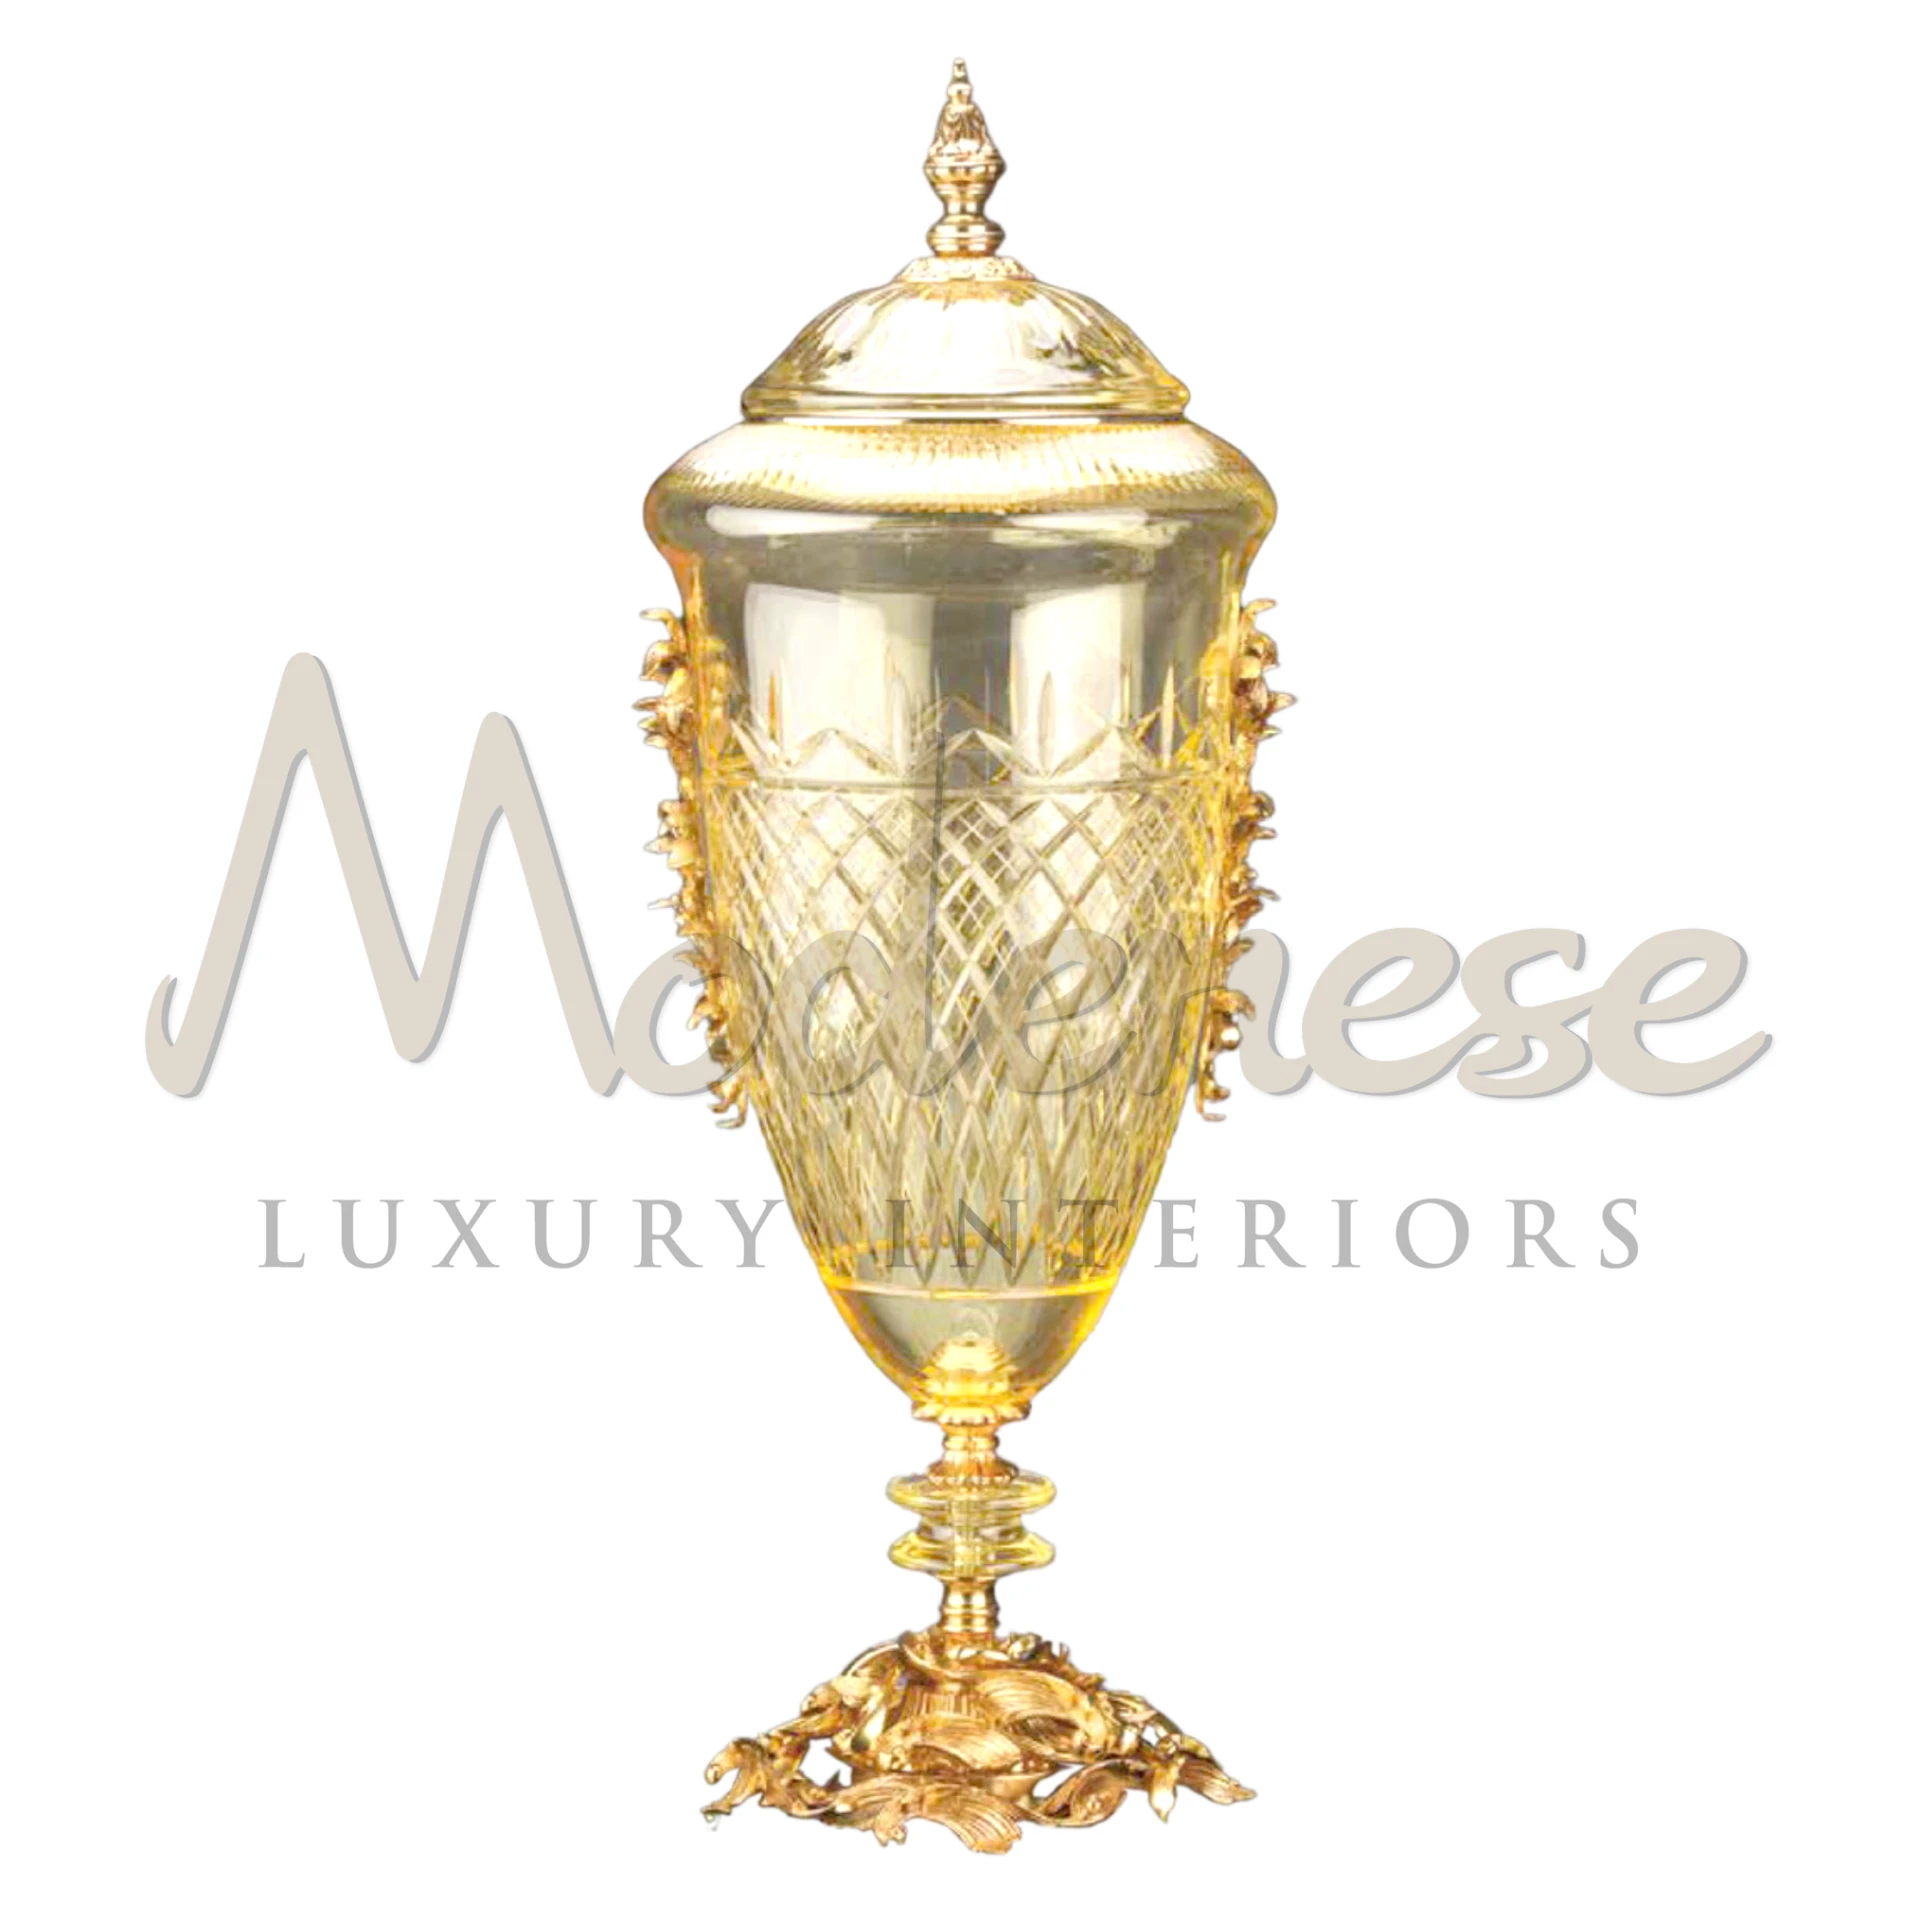 Victorian Light Glass Vase, featuring intricate patterns and elegant embellishments, brings a historical and sophisticated charm to interior decor.